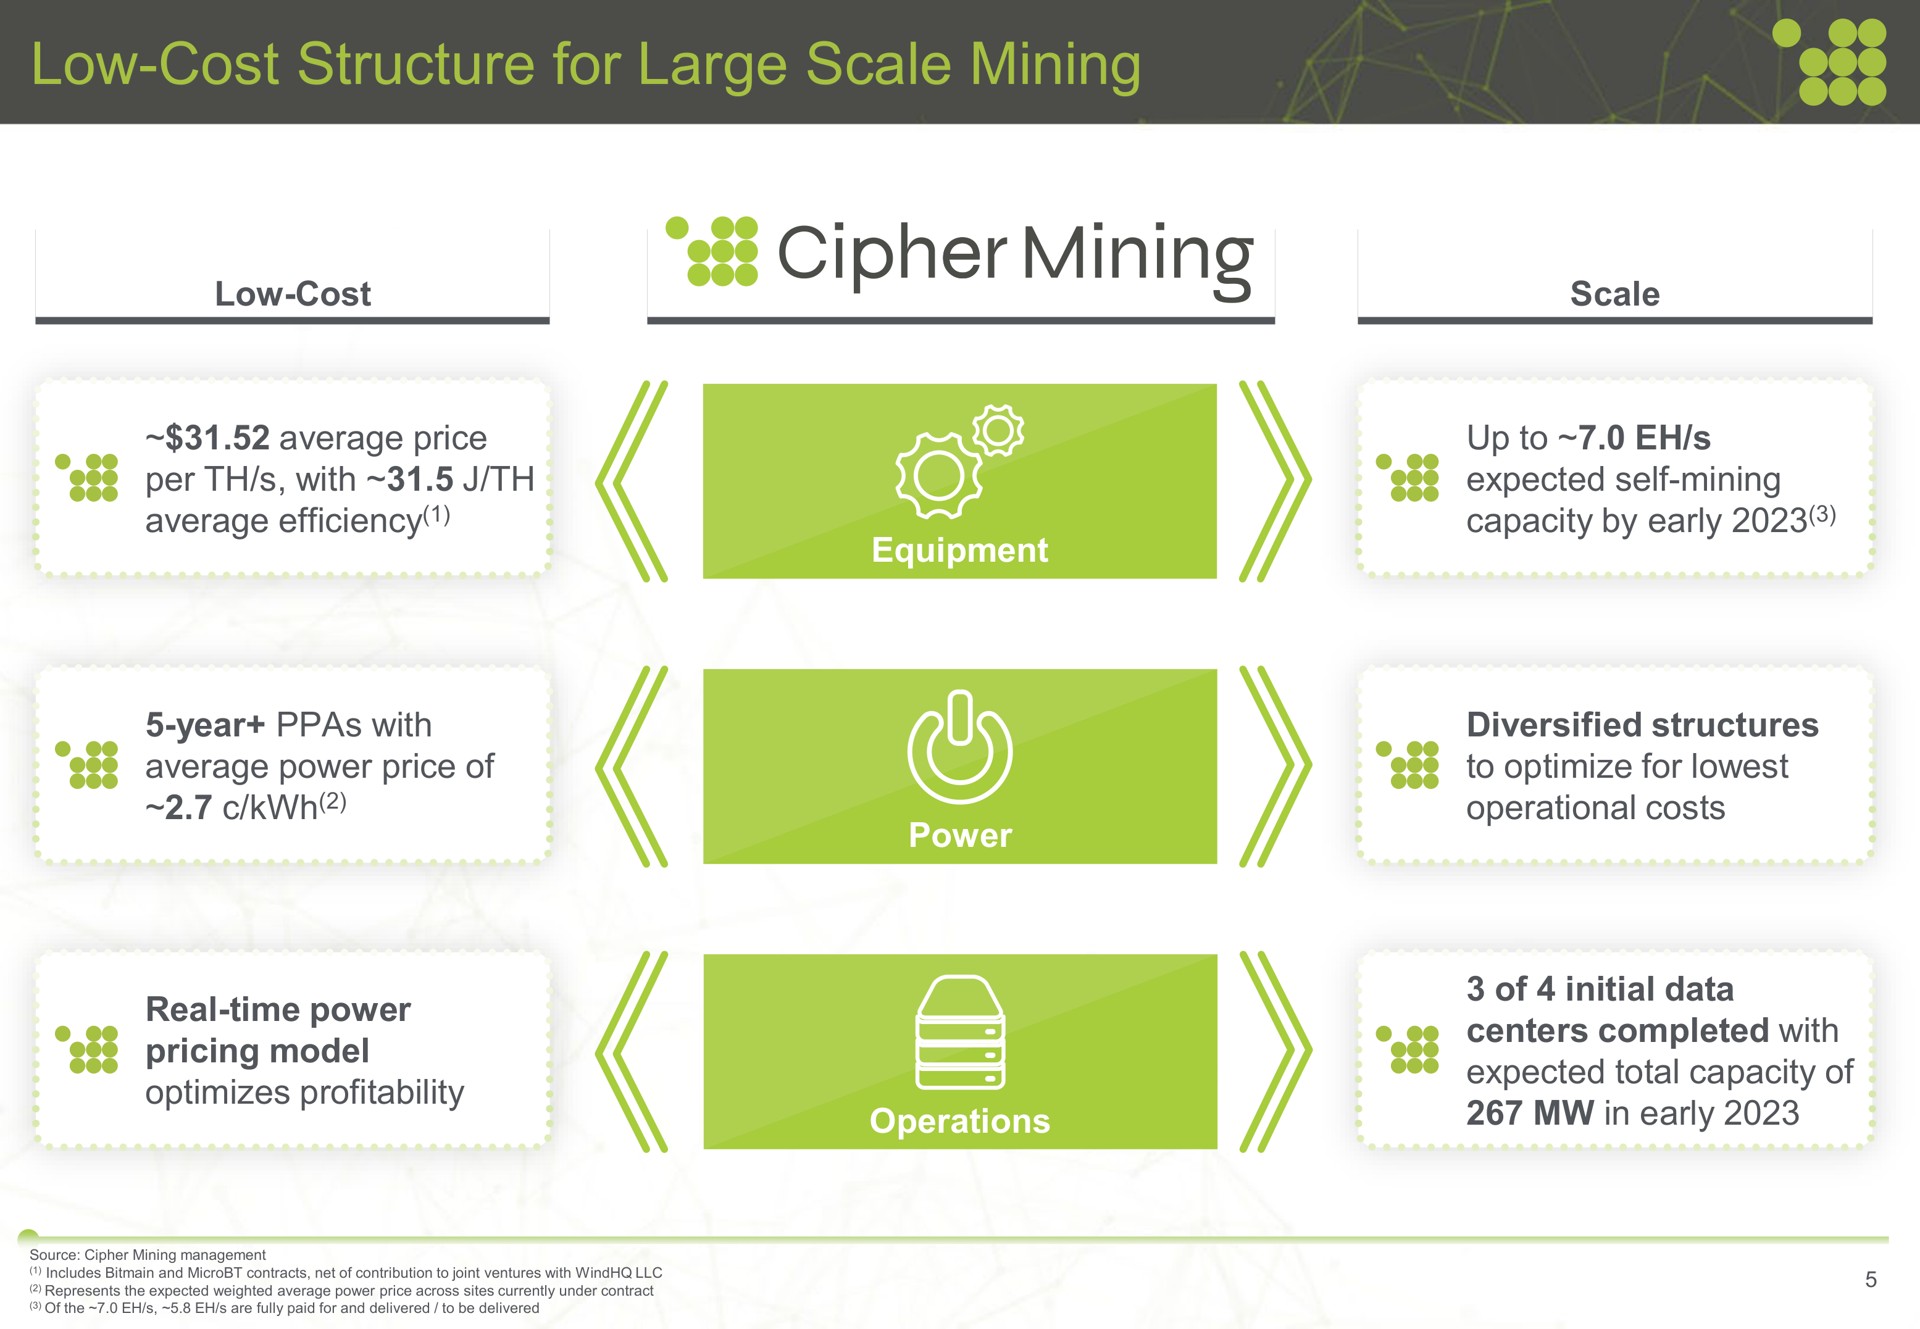 low cost structure for large scale mining cipher average price per with average efficiency equipment up to expected self mining capacity by early average power price of see power real time power pricing model optimizes profitability diversified structures to optimize operational costs of initial data centers completed with expected total capacity of in early | Cipher Mining